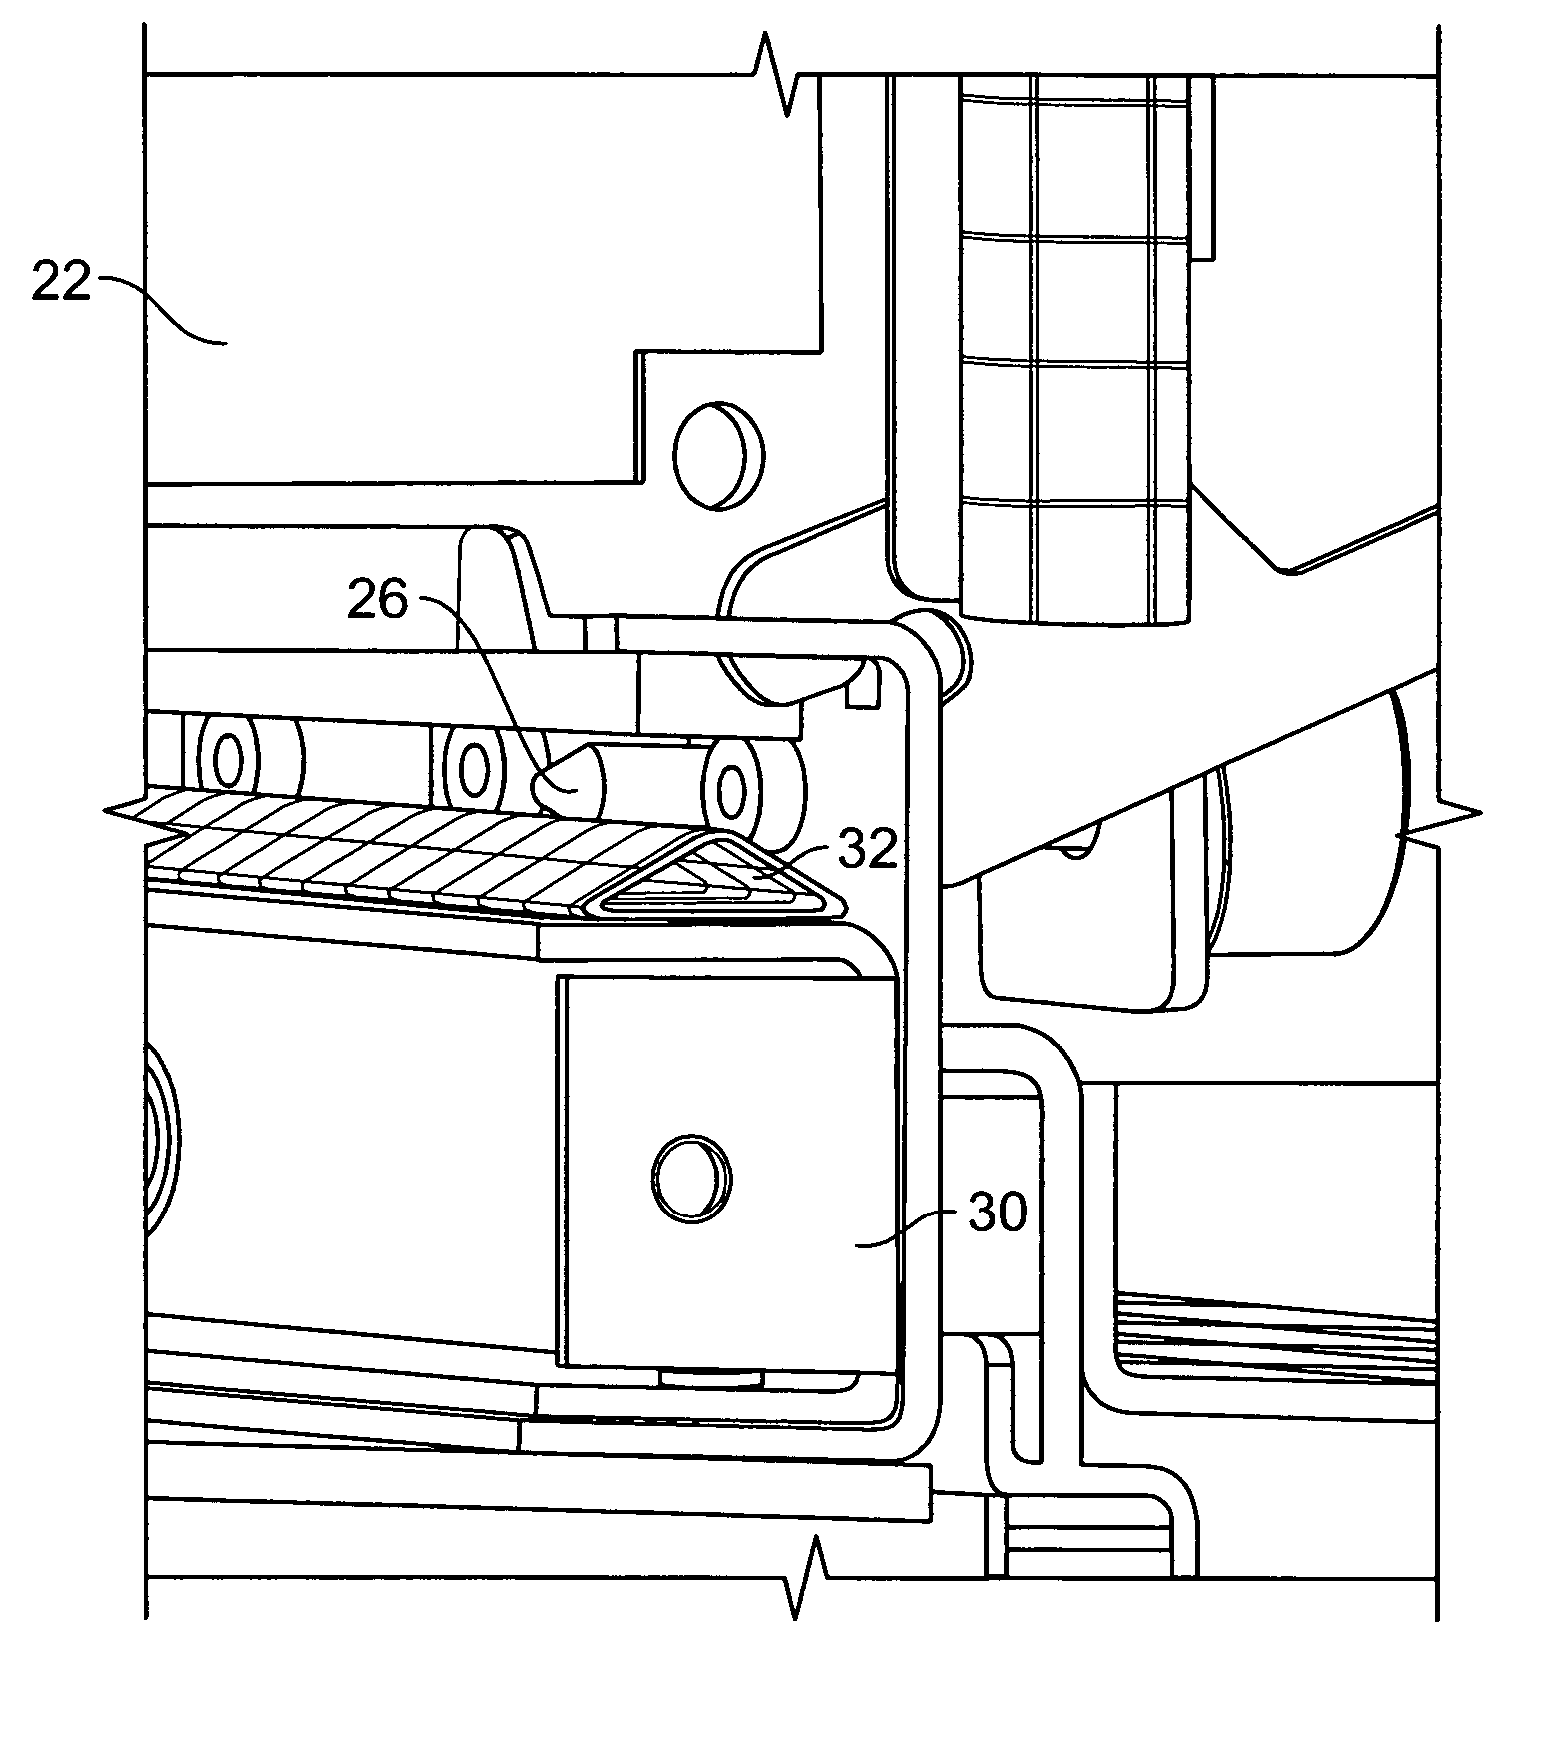 ESD system for grounding electronics within an enclosure